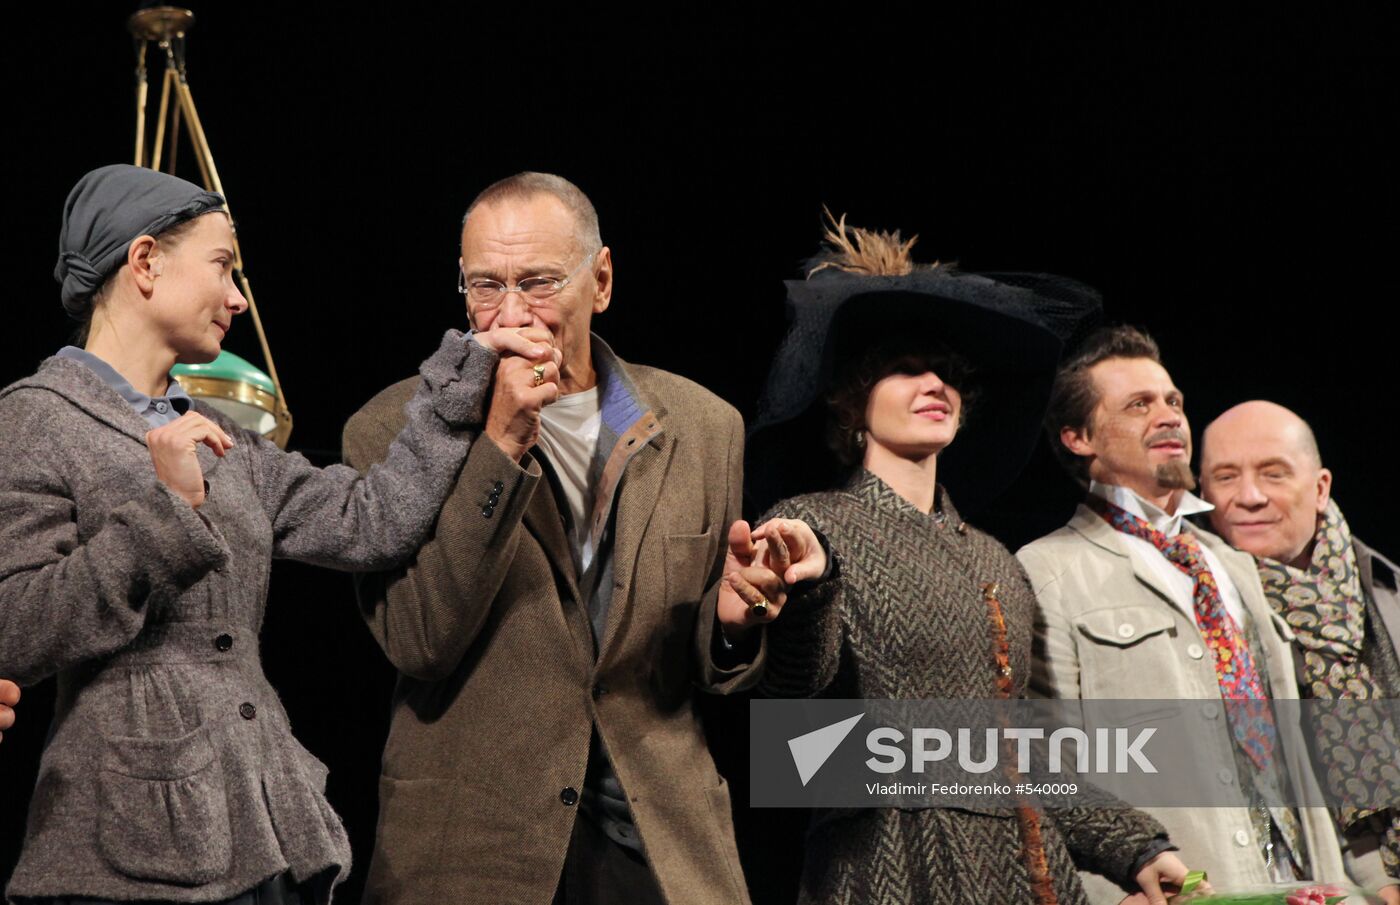 Mossovet Theater's pre-premiere show of Uncle Vanya